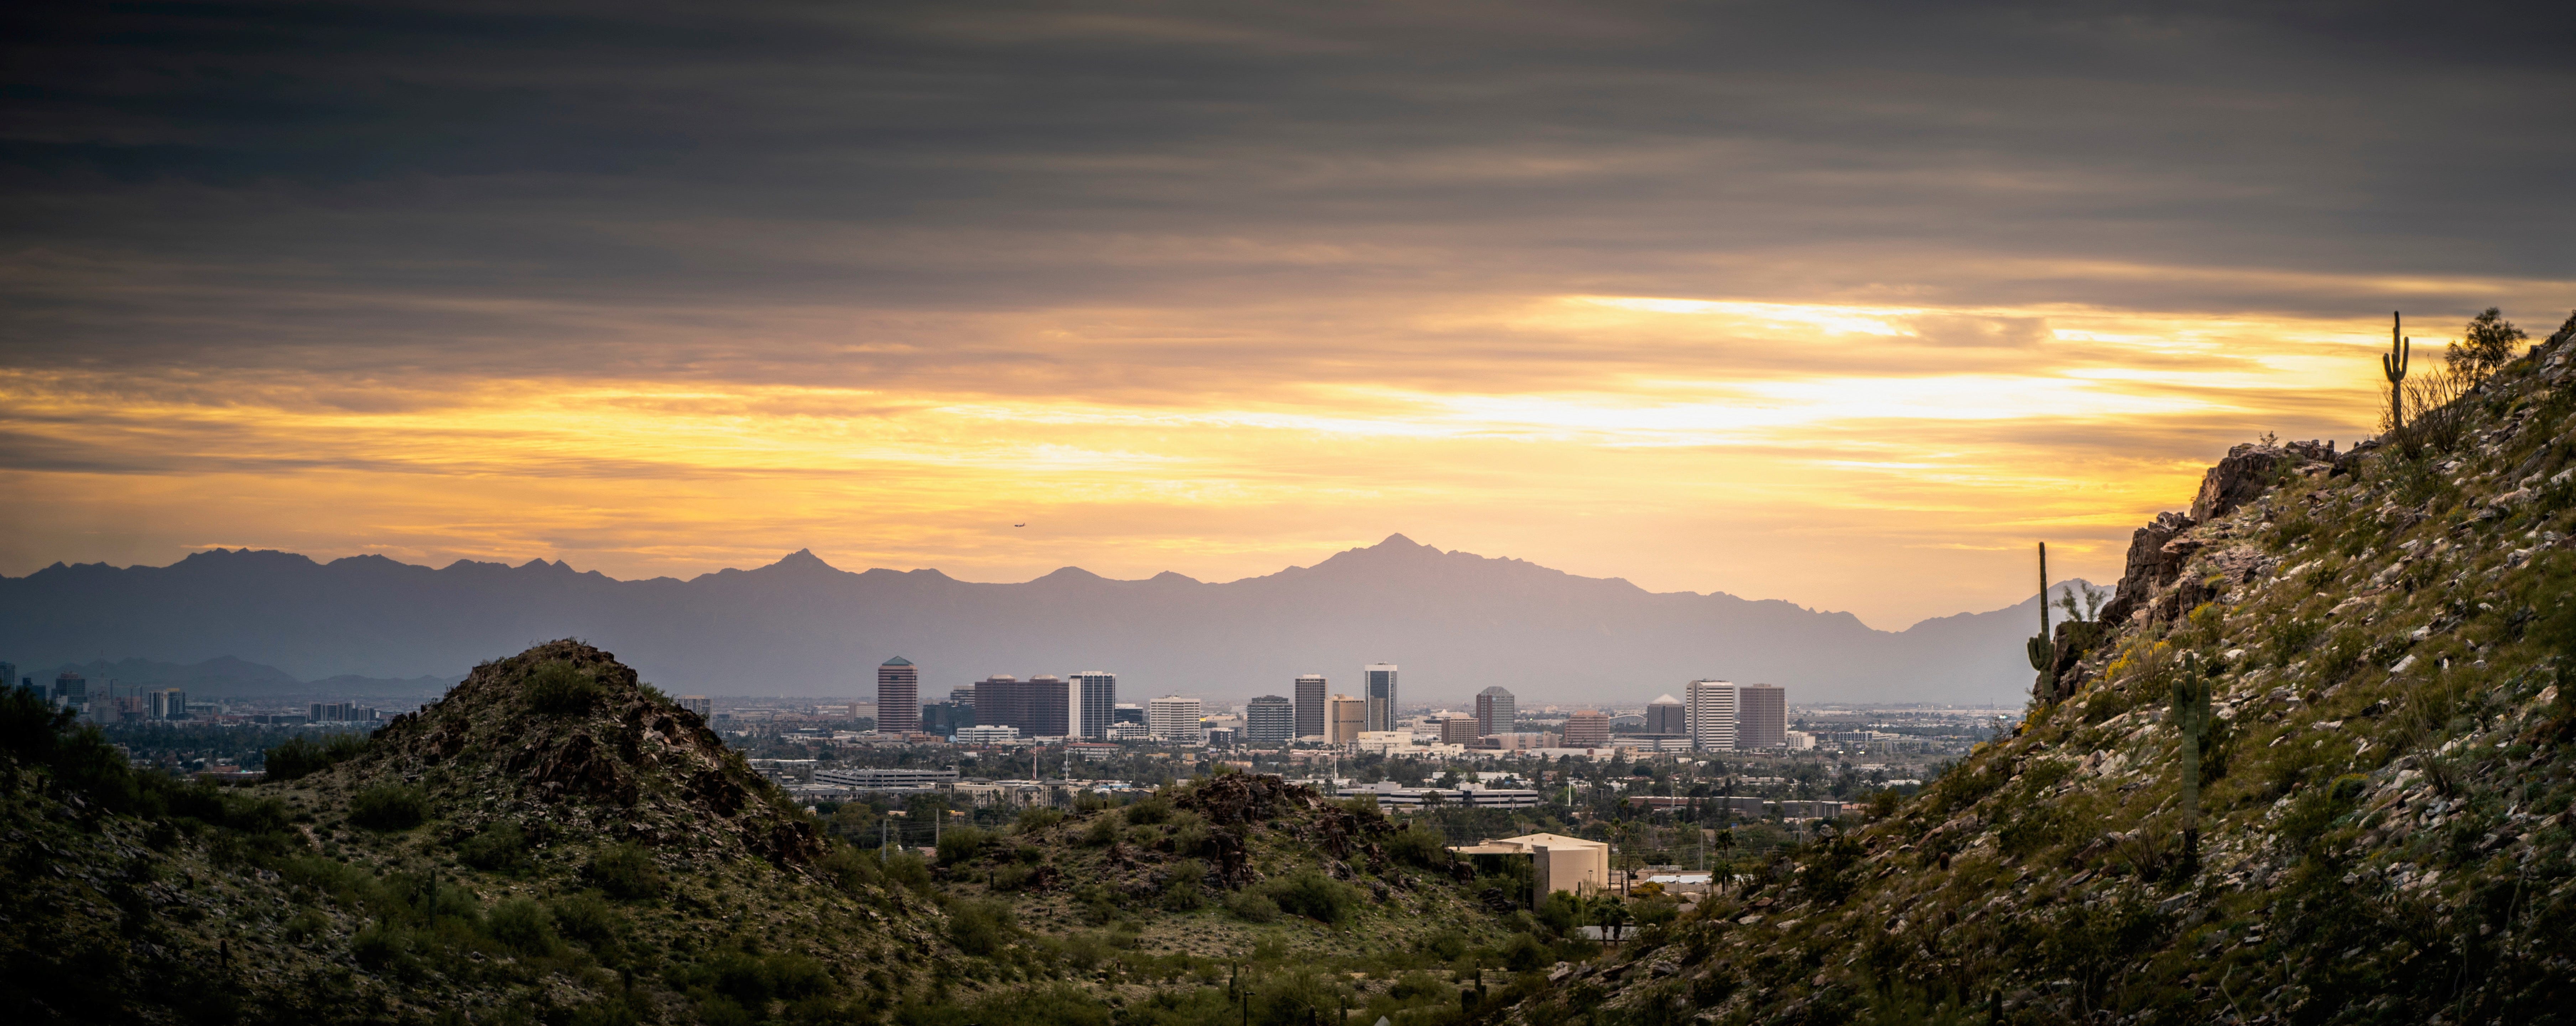 Phoenix Is Ready For More Rapid Growth By What Works Cities What Works Cities Certification Medium